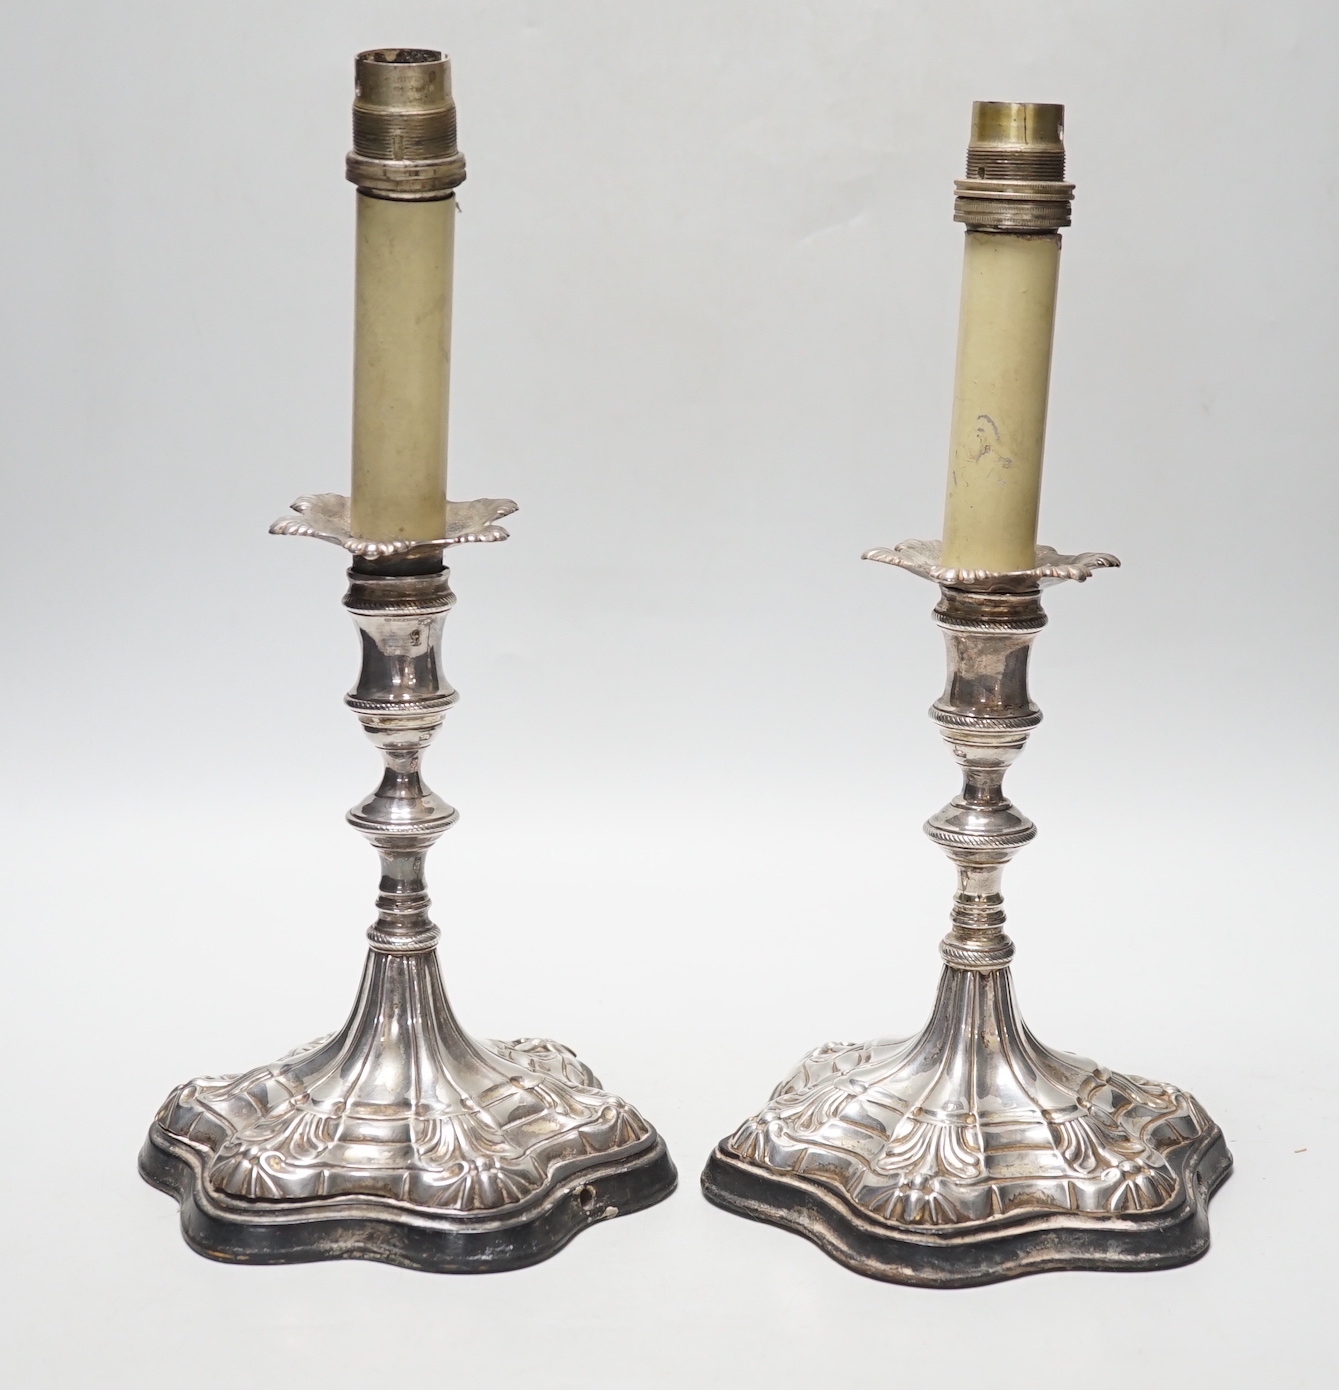 A pair of Georgian? silver candlesticks, on later wooden bases which have been drilled for electricity and later plated? sconces, sticks only, excluding sconces, are 16cm.